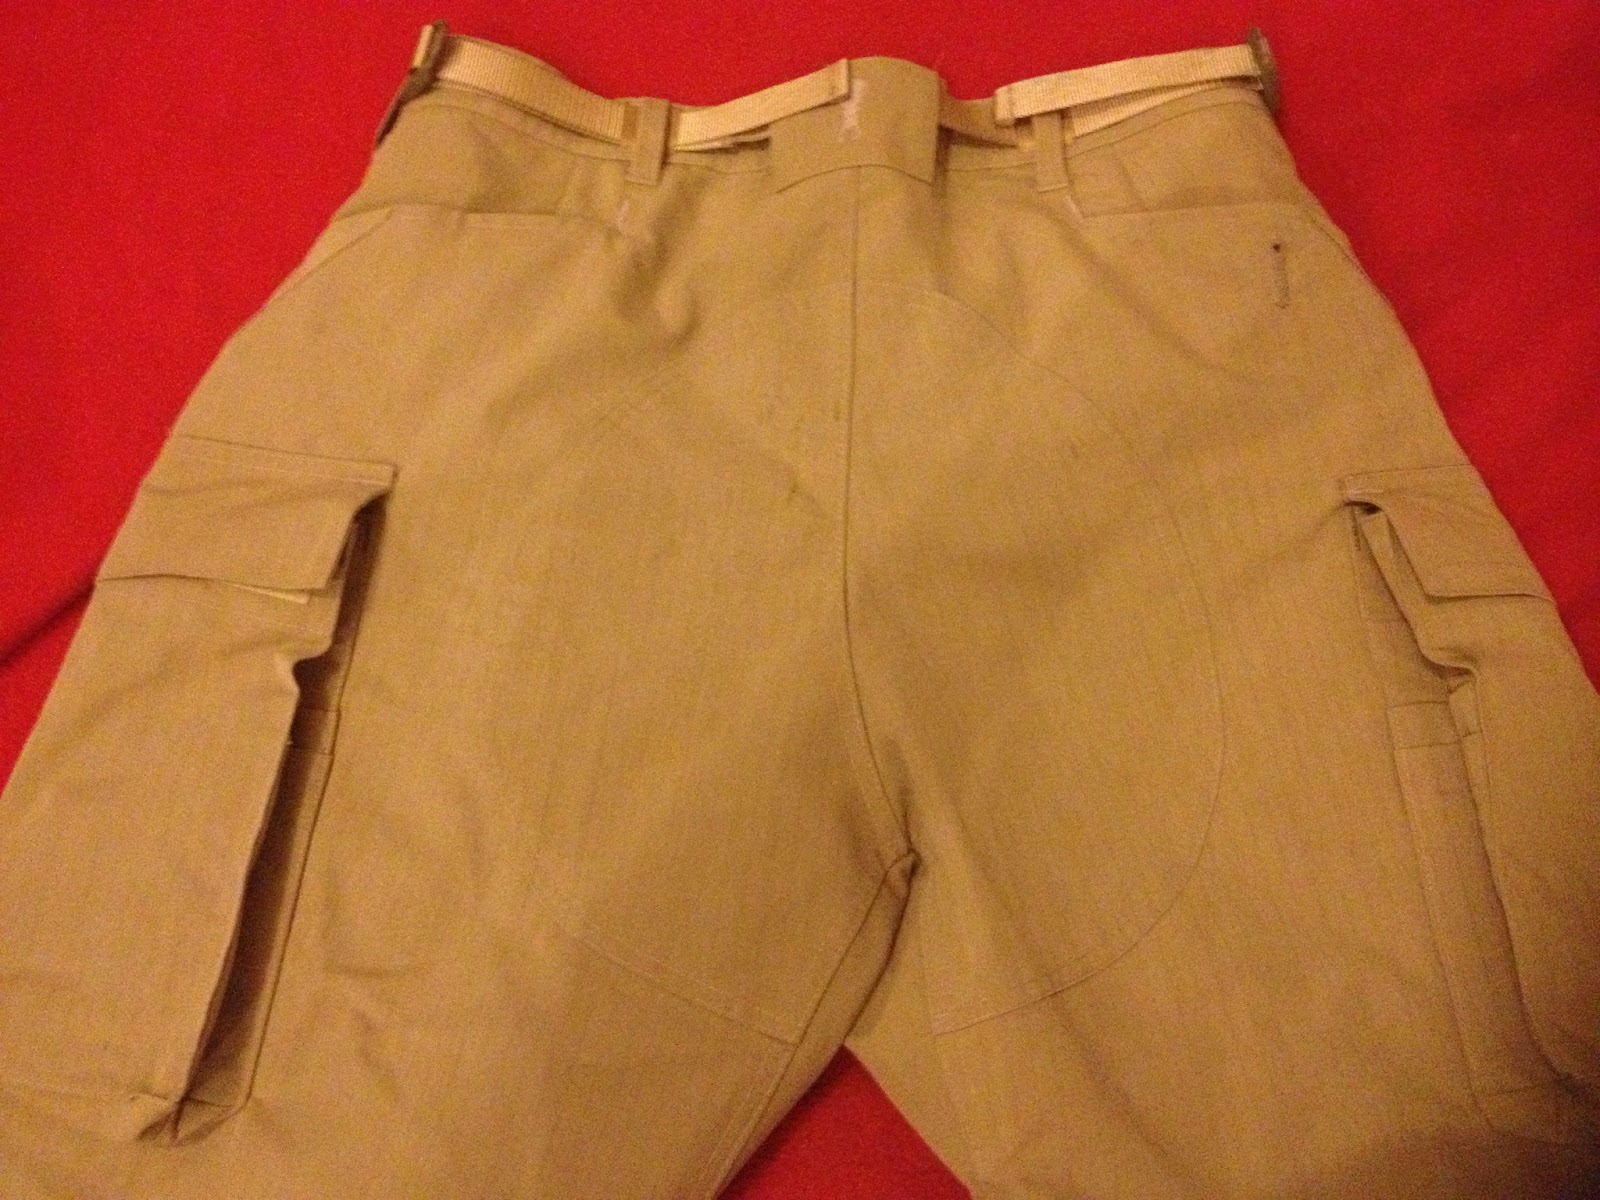 ApocalypseEquipped: Review: Platatac - Urban Dax pants